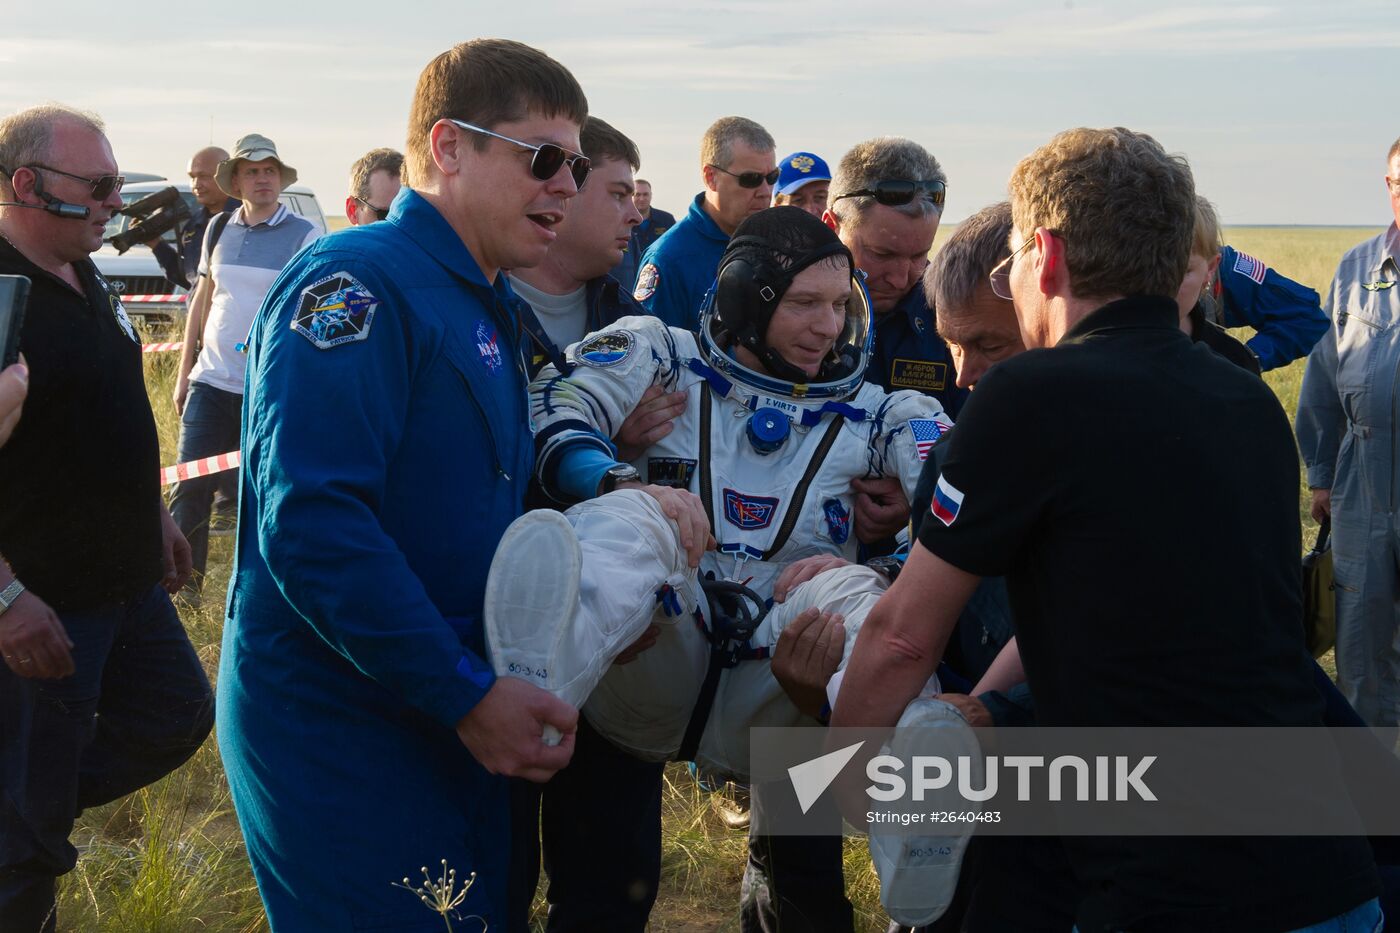 ISS 42/43 expedition crew is back on Earth